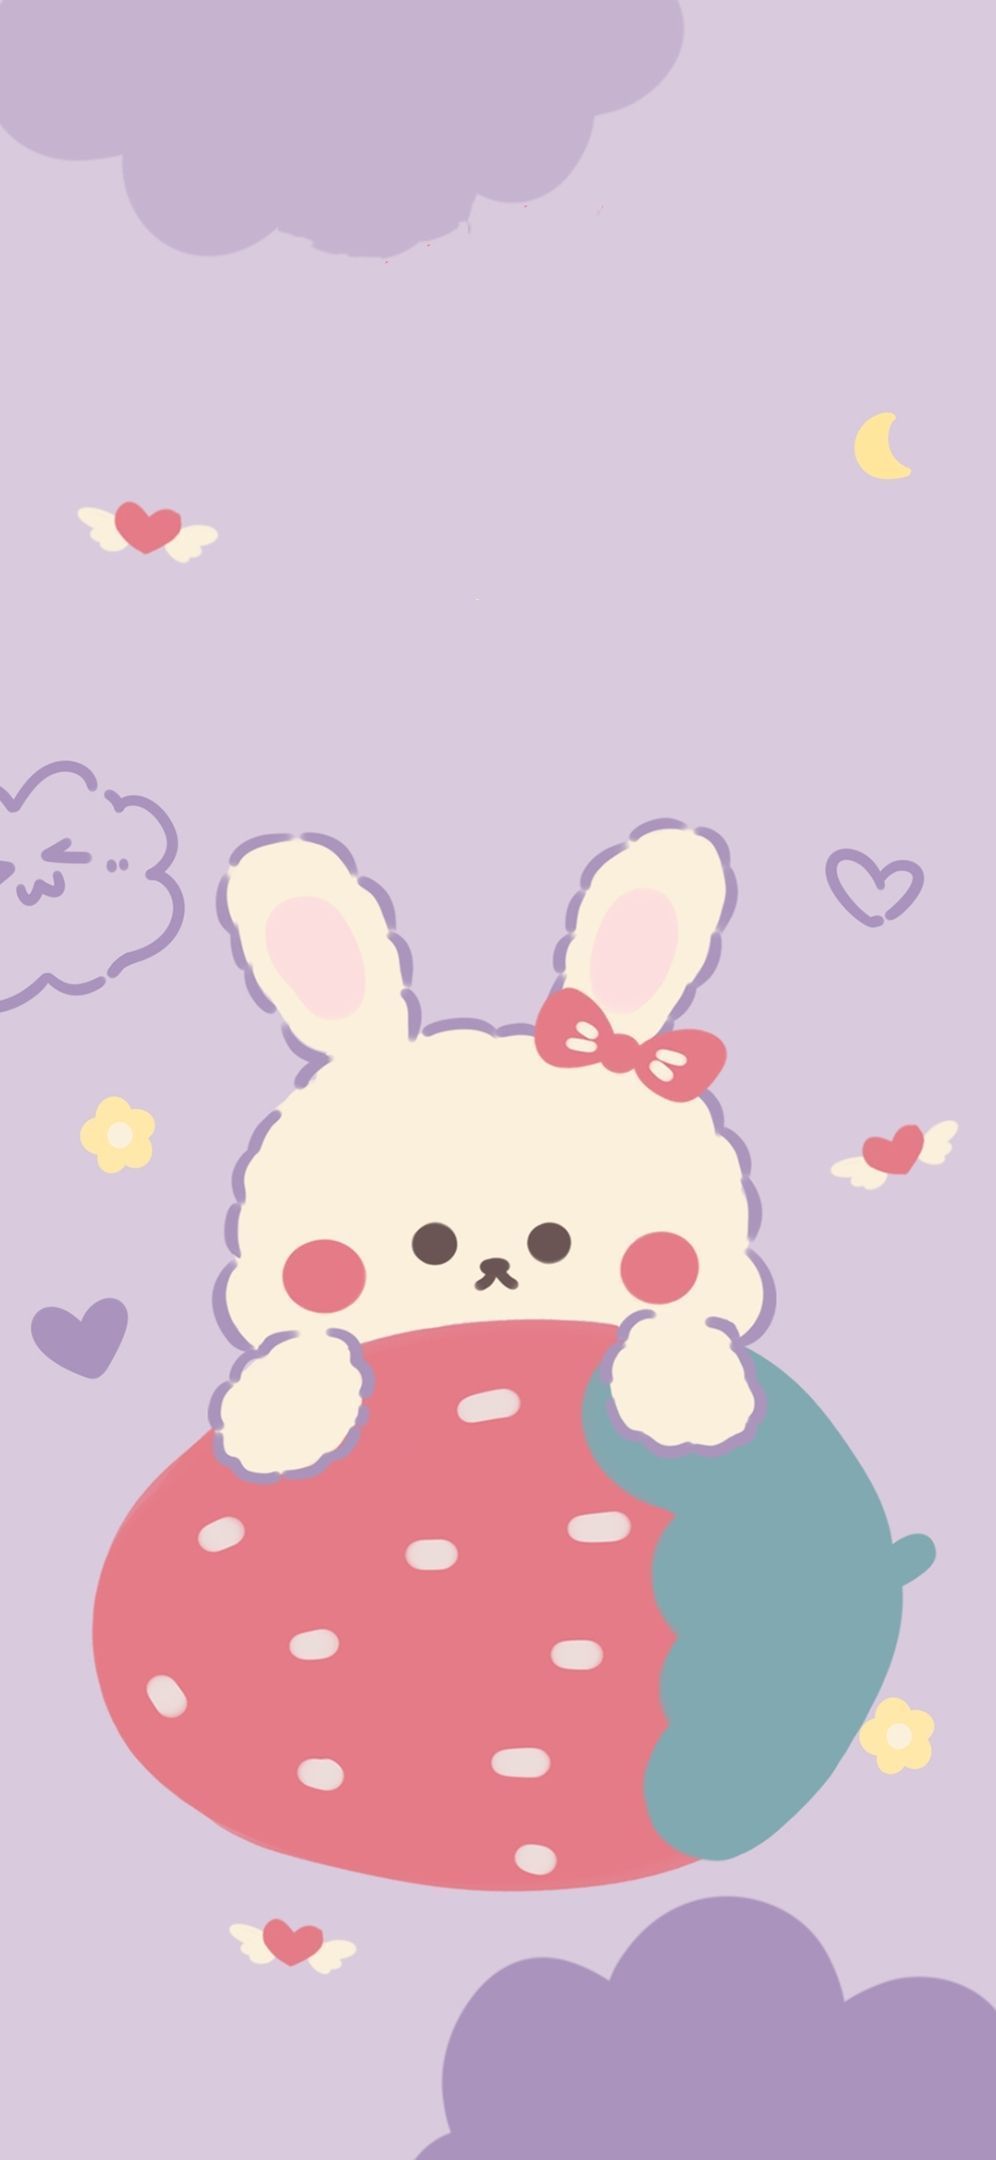 ♡ Be Positive ♡ — BUNNY WALLPAPERS